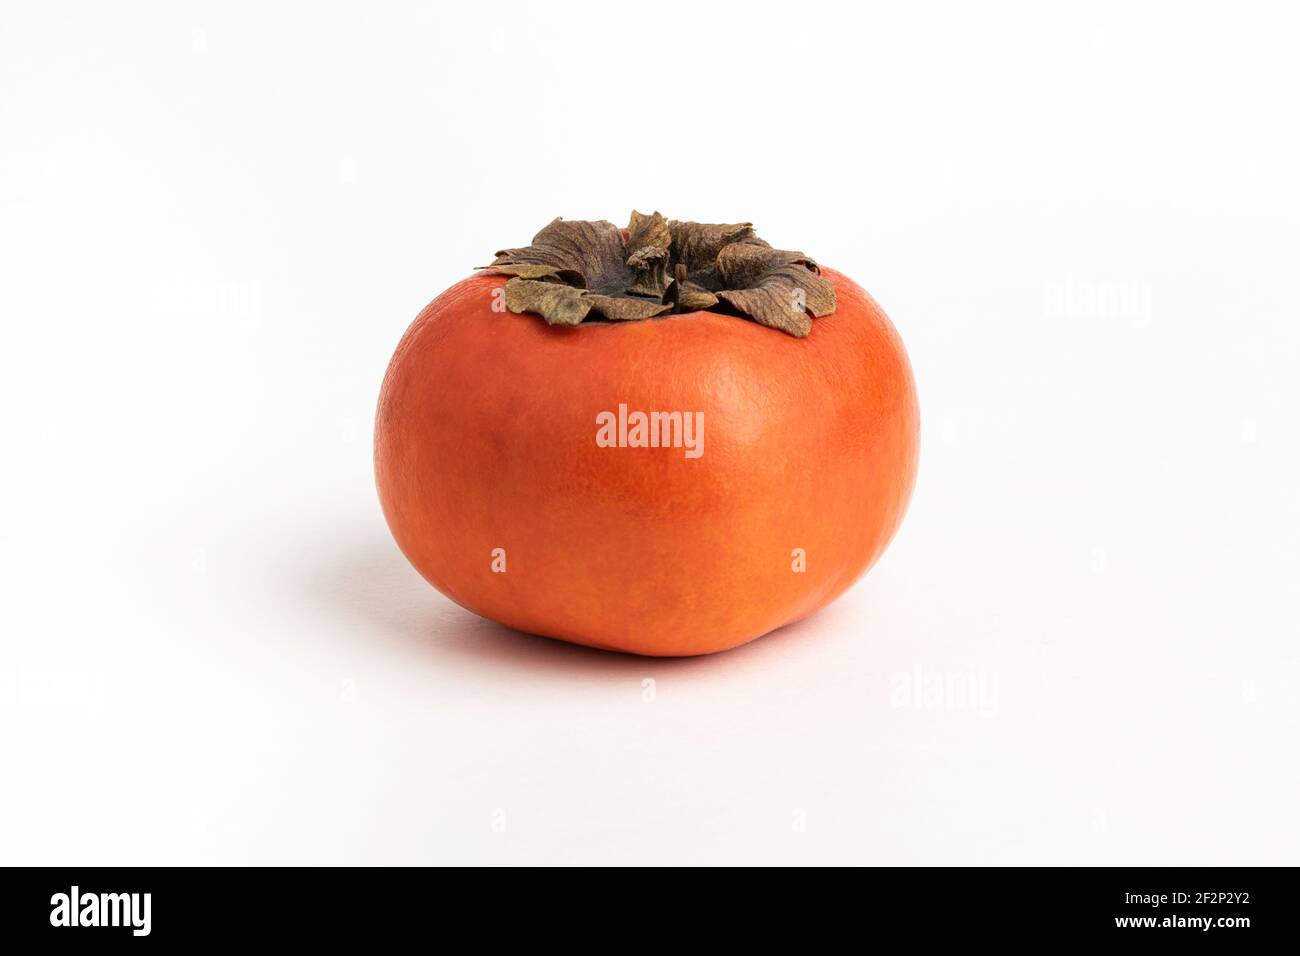 Close-up shot with shallow depth of field of a ripe persimmon fruit set on a plain white background. Stock Photo